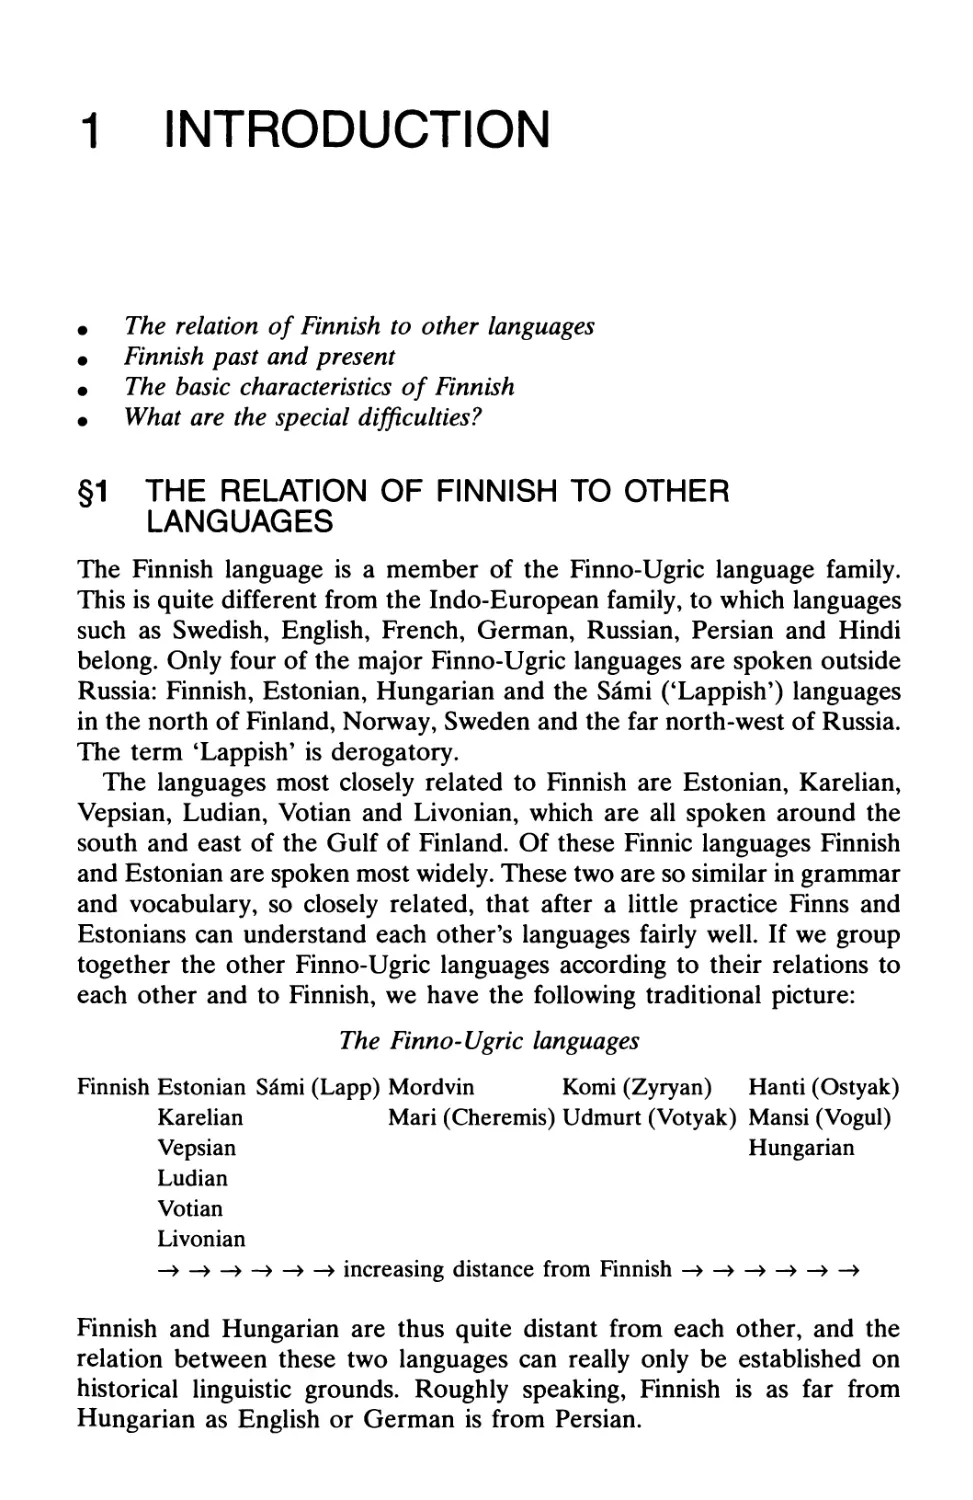 1 Introduction
§2 Finnish past and present